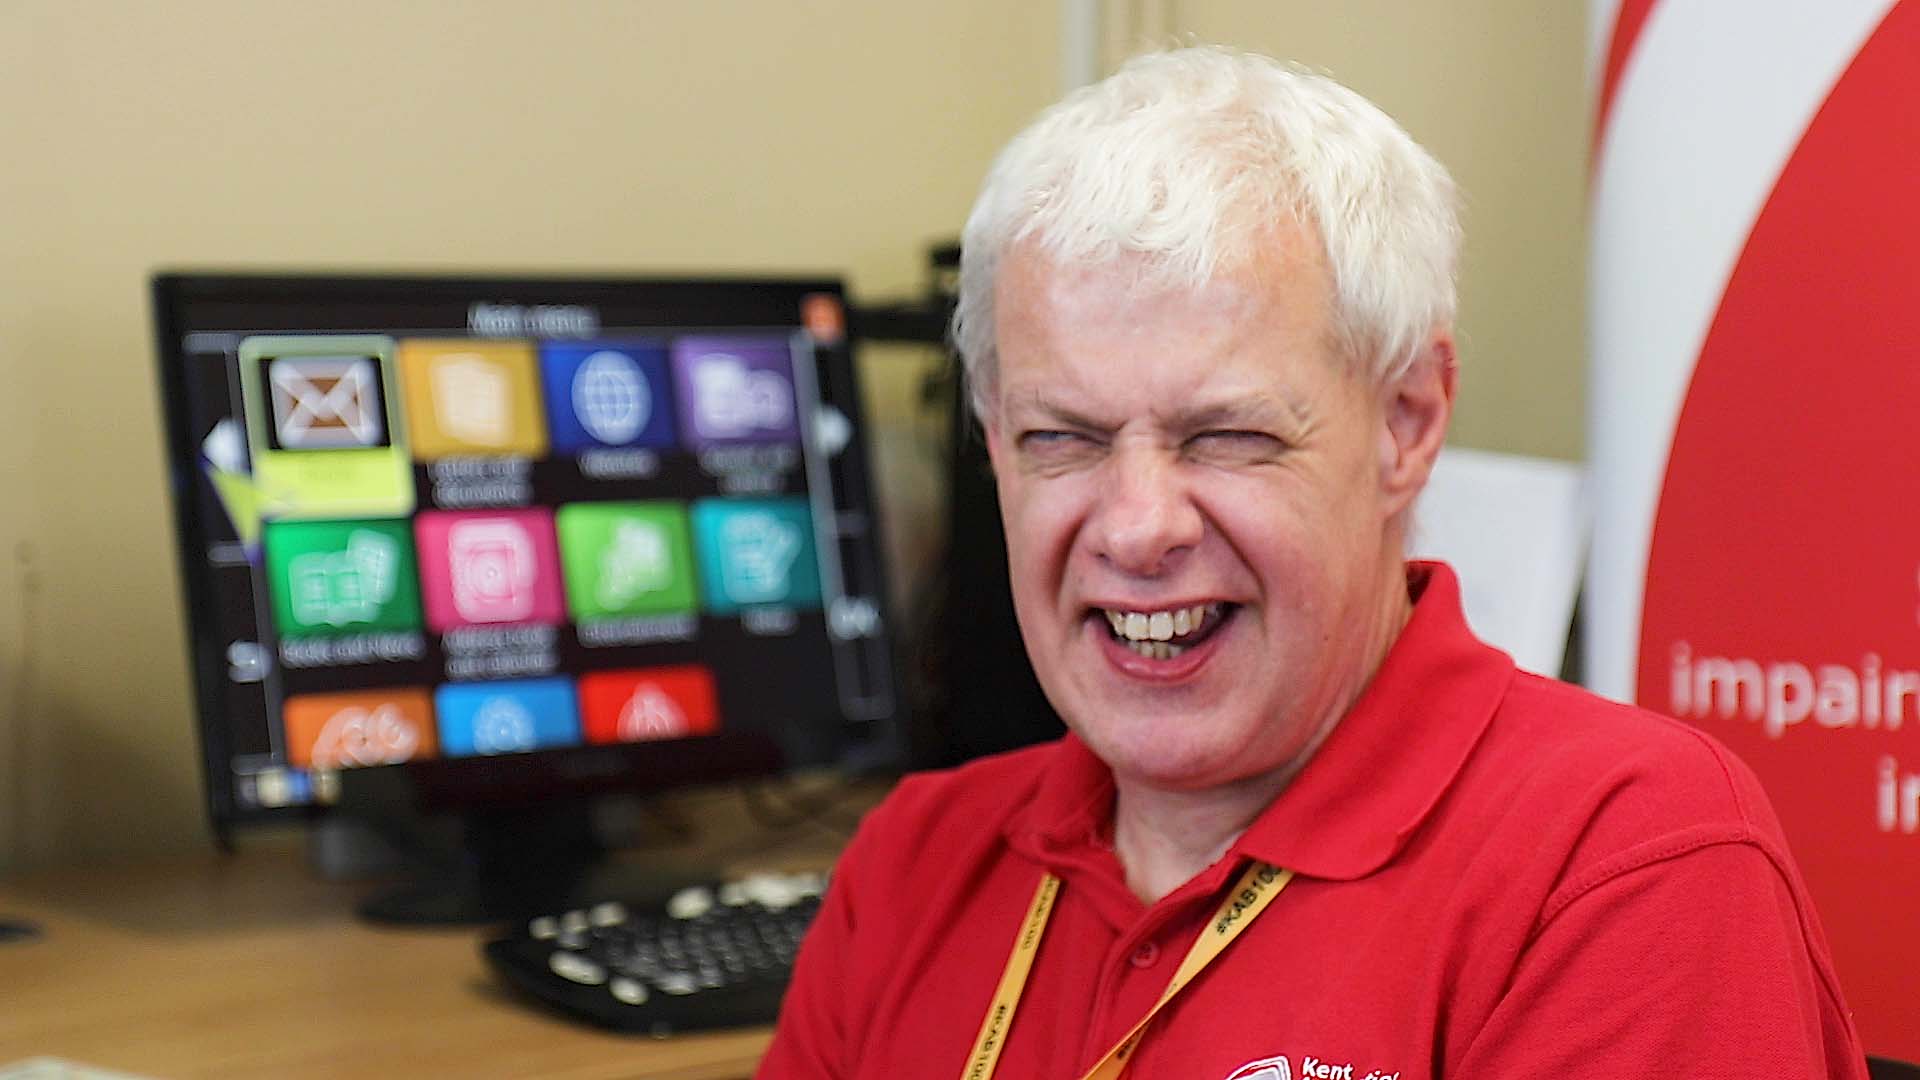 Assistive technology work, Steve from KAB, facing the camera and laughing.